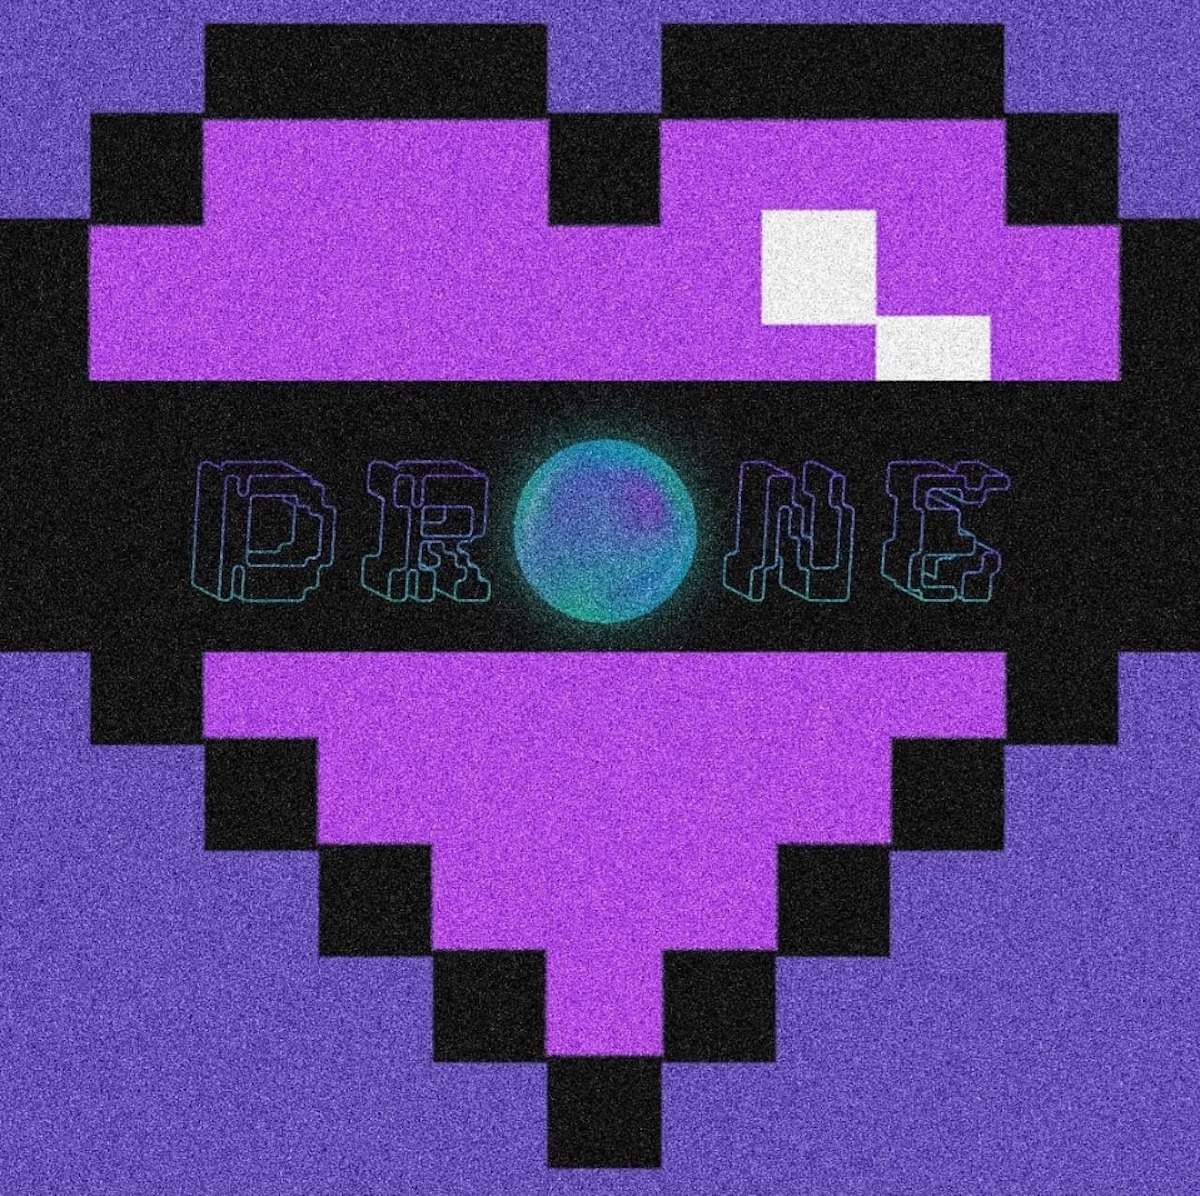 Drone Day Poster with the text 'DRONE' inside an pixelated purple heart